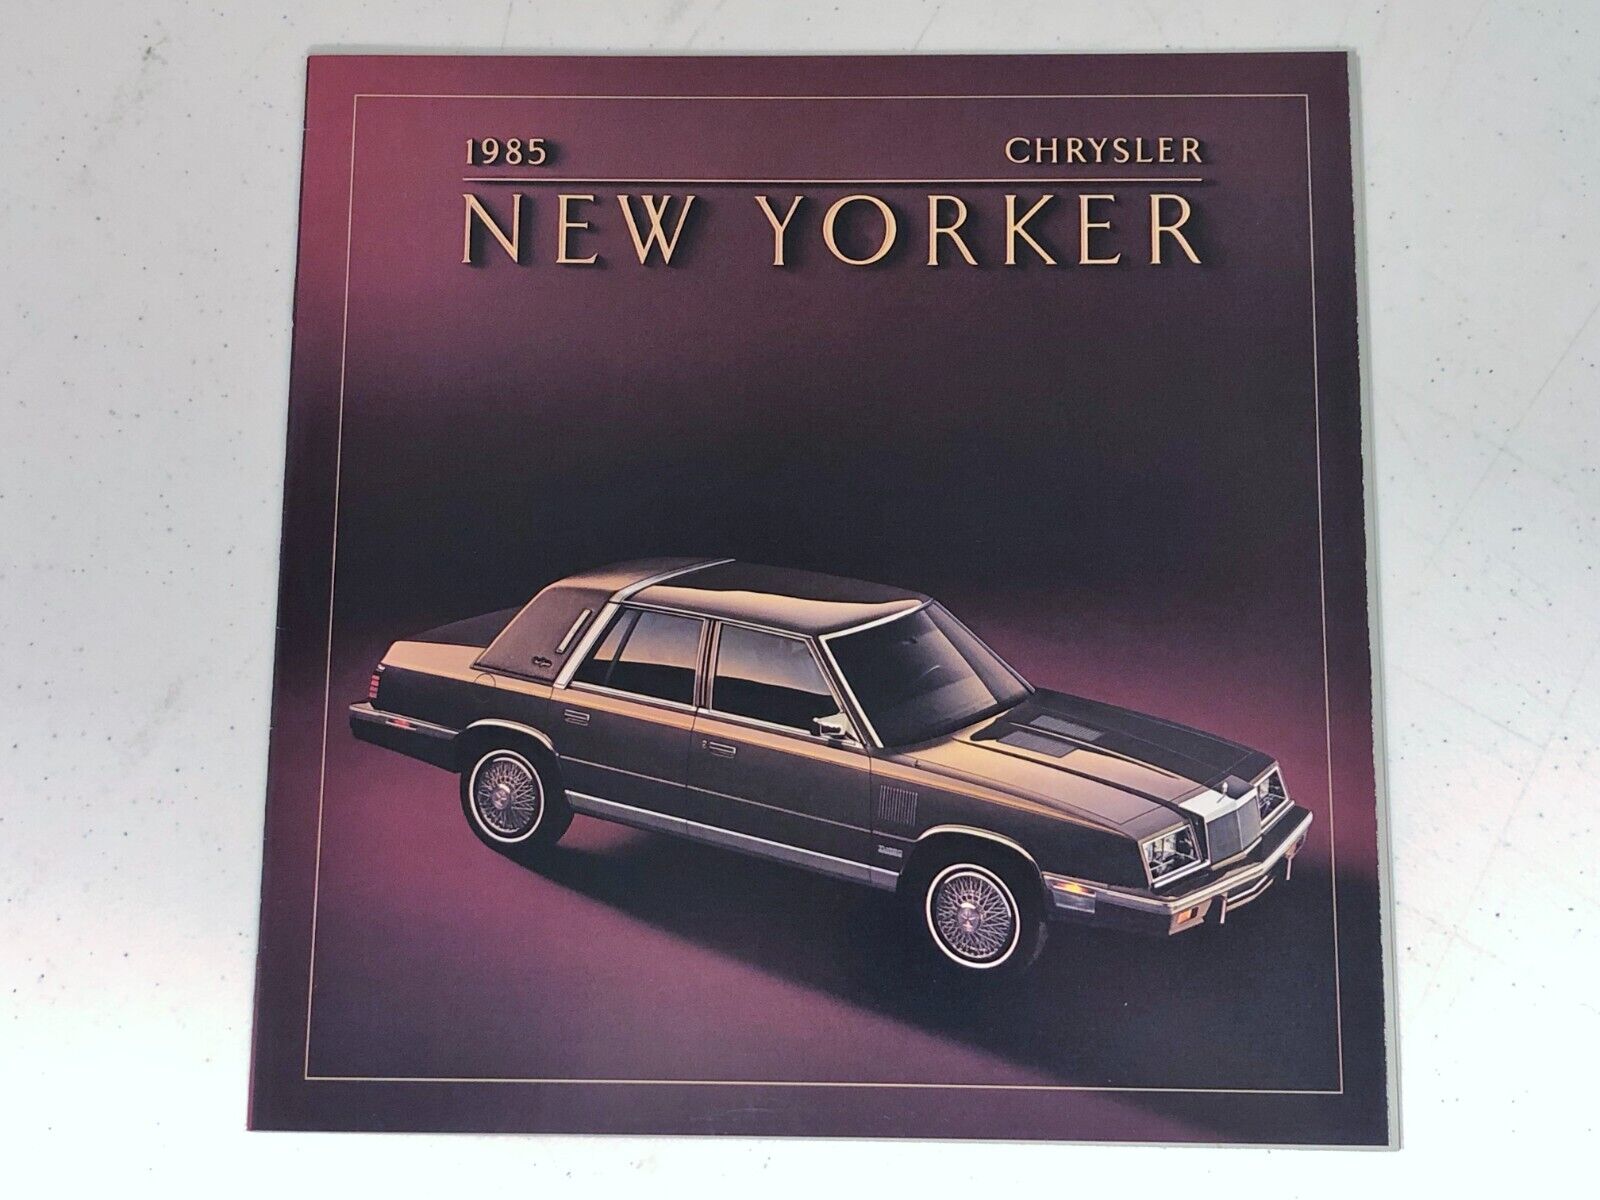 1985 CHRYSLER NEW YORKER SALES BROCHURE CATALOG IN EXCELLENT CONDITION